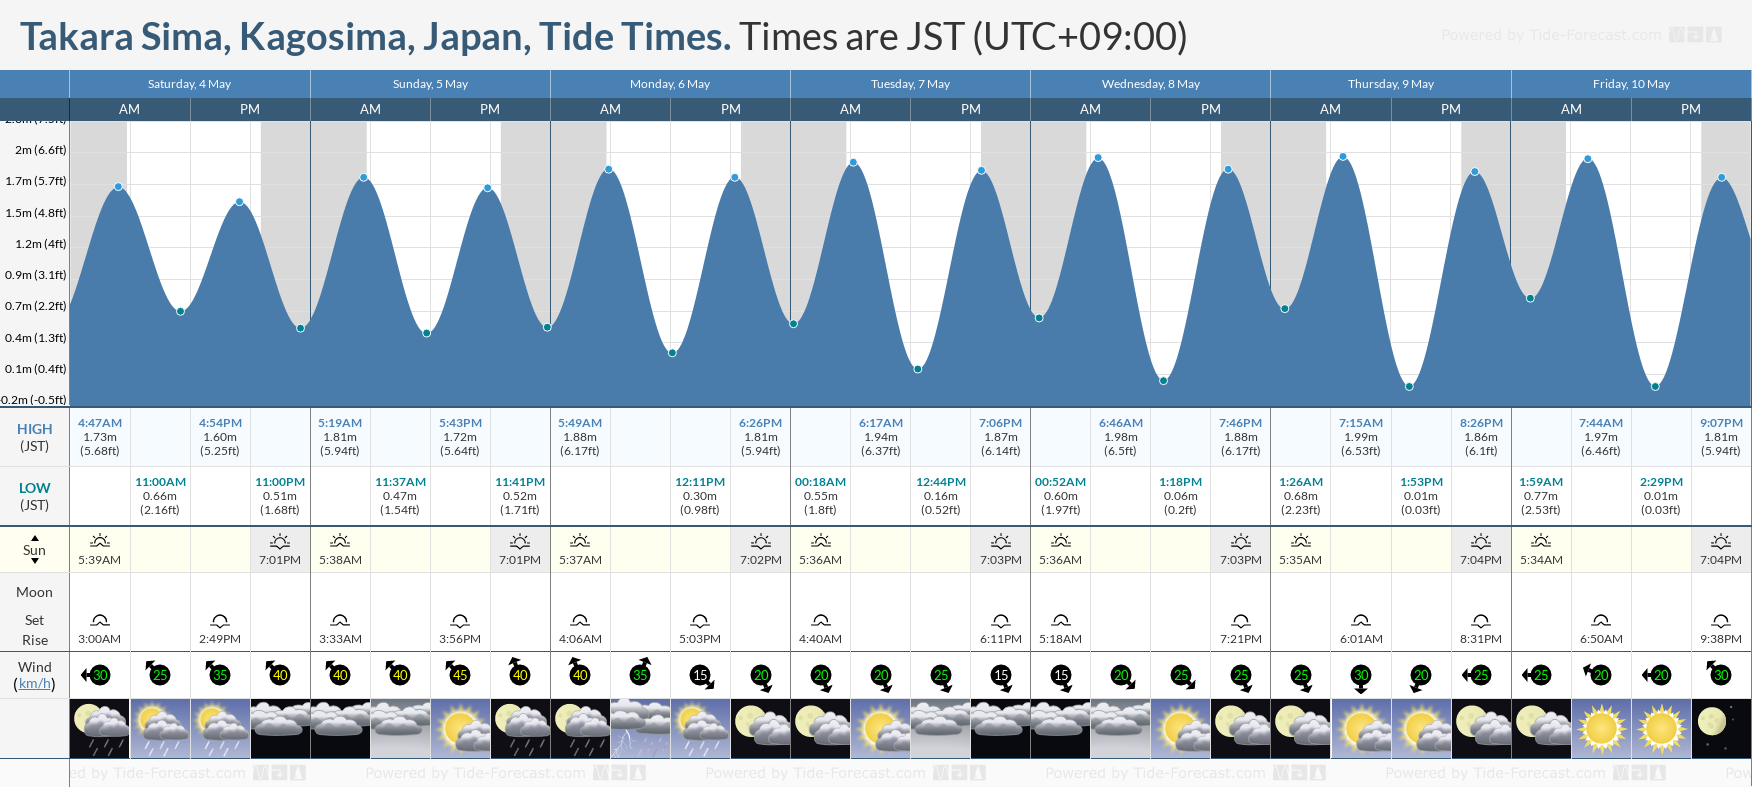 Takara Sima, Kagosima, Japan Tide Chart including high and low tide tide times for the next 7 days